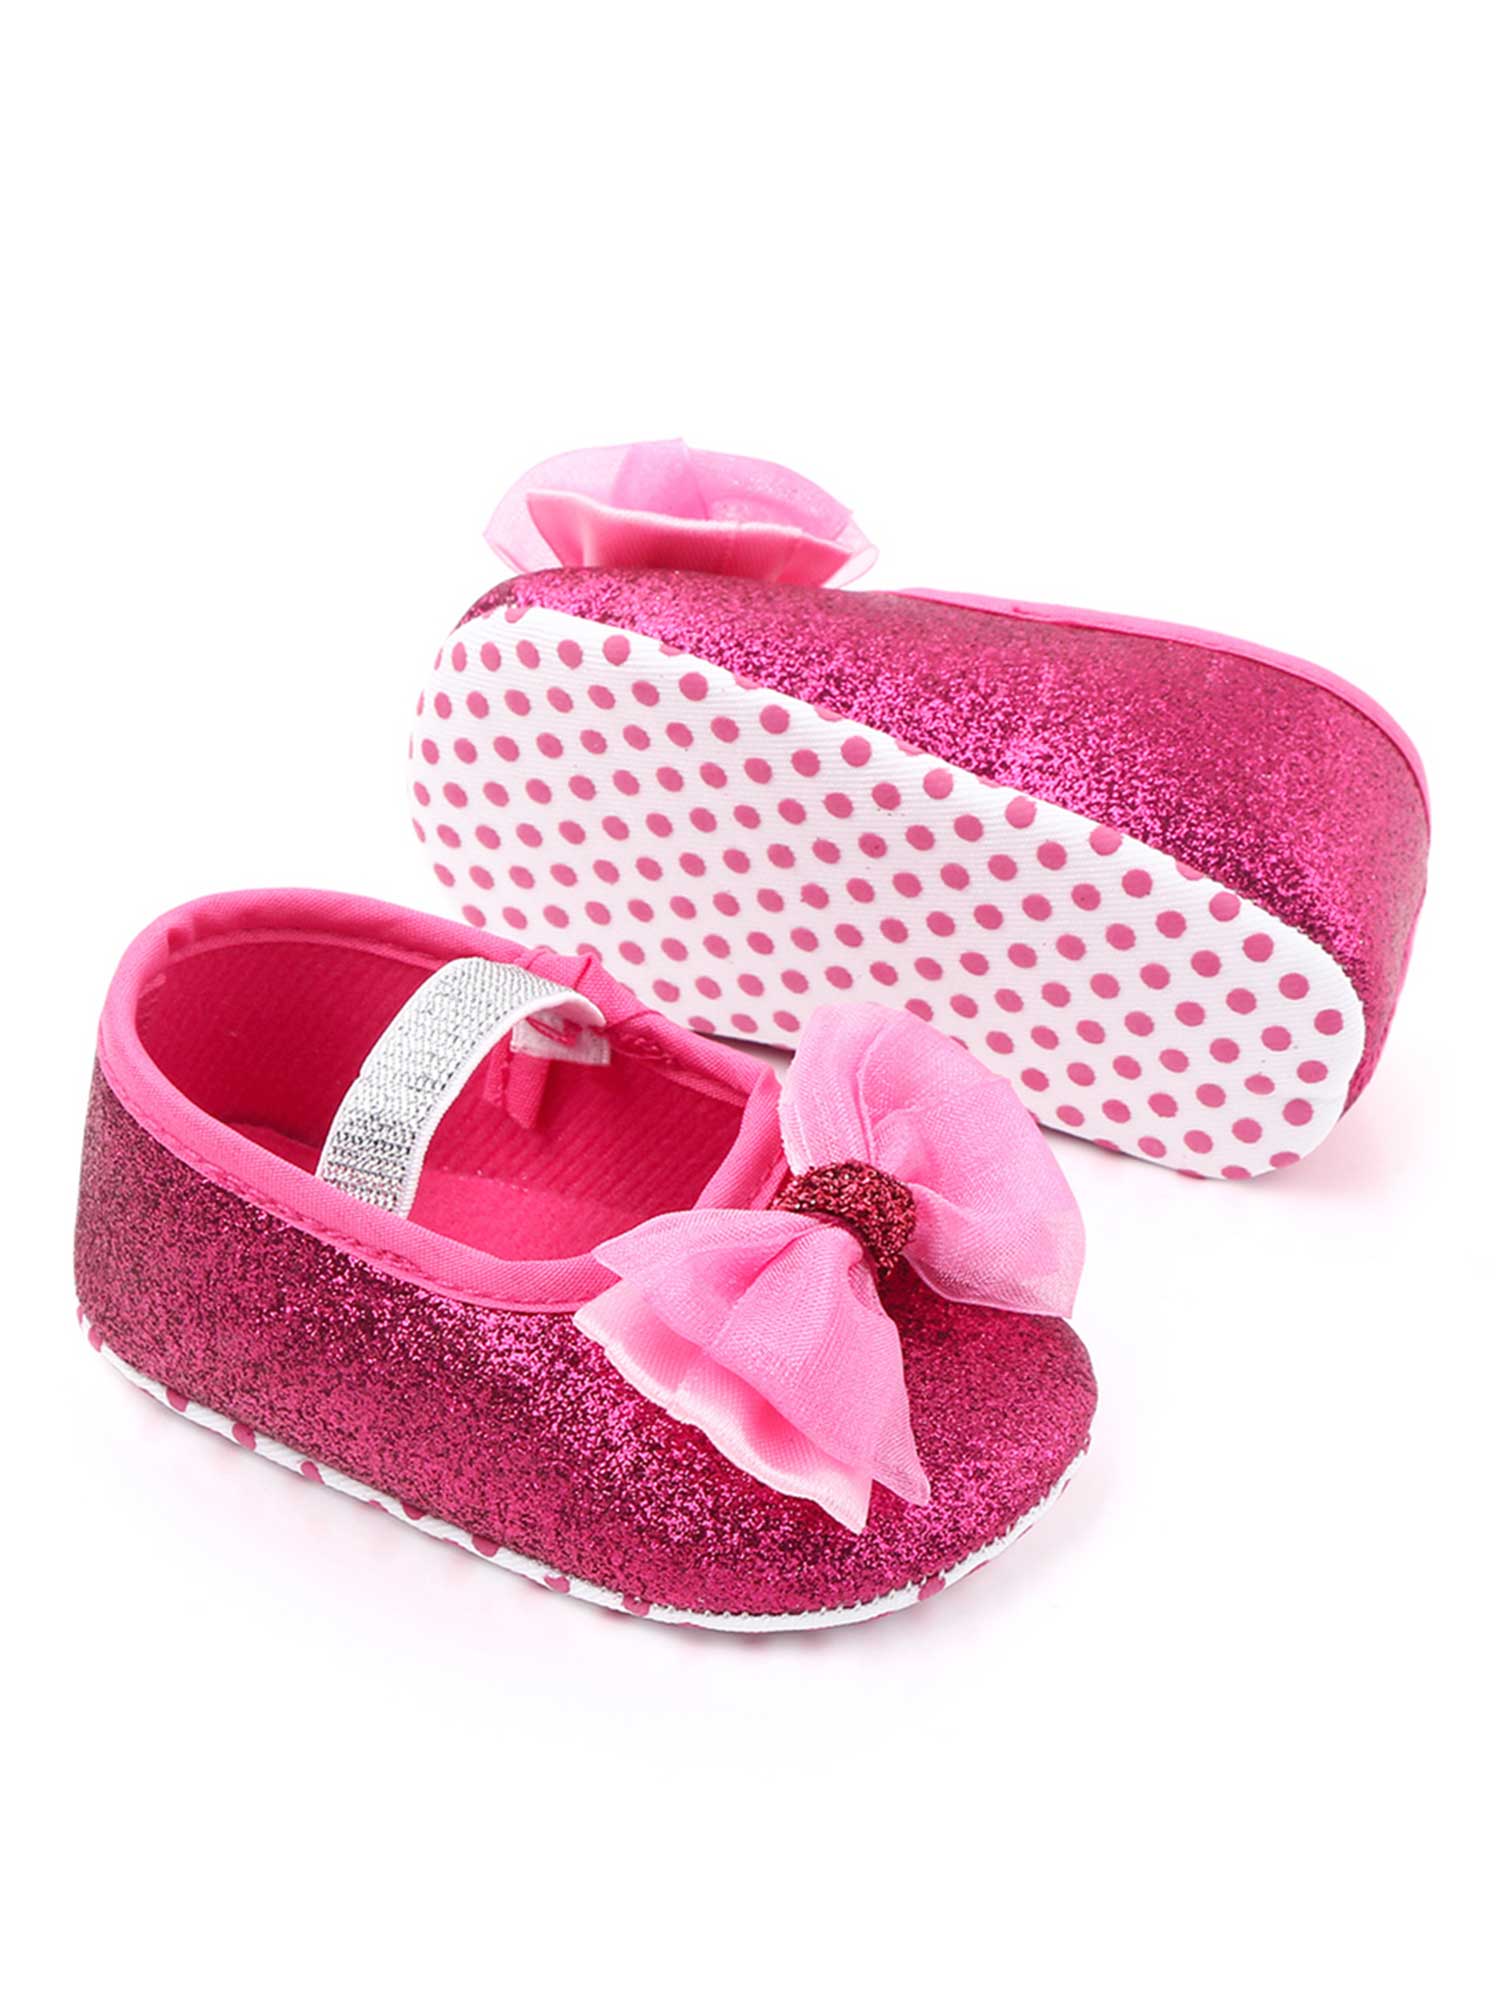 Puloru Baby Girls' Anti-Slip Sole Toddler Shoes Infant Flats Snow Boots - image 4 of 5